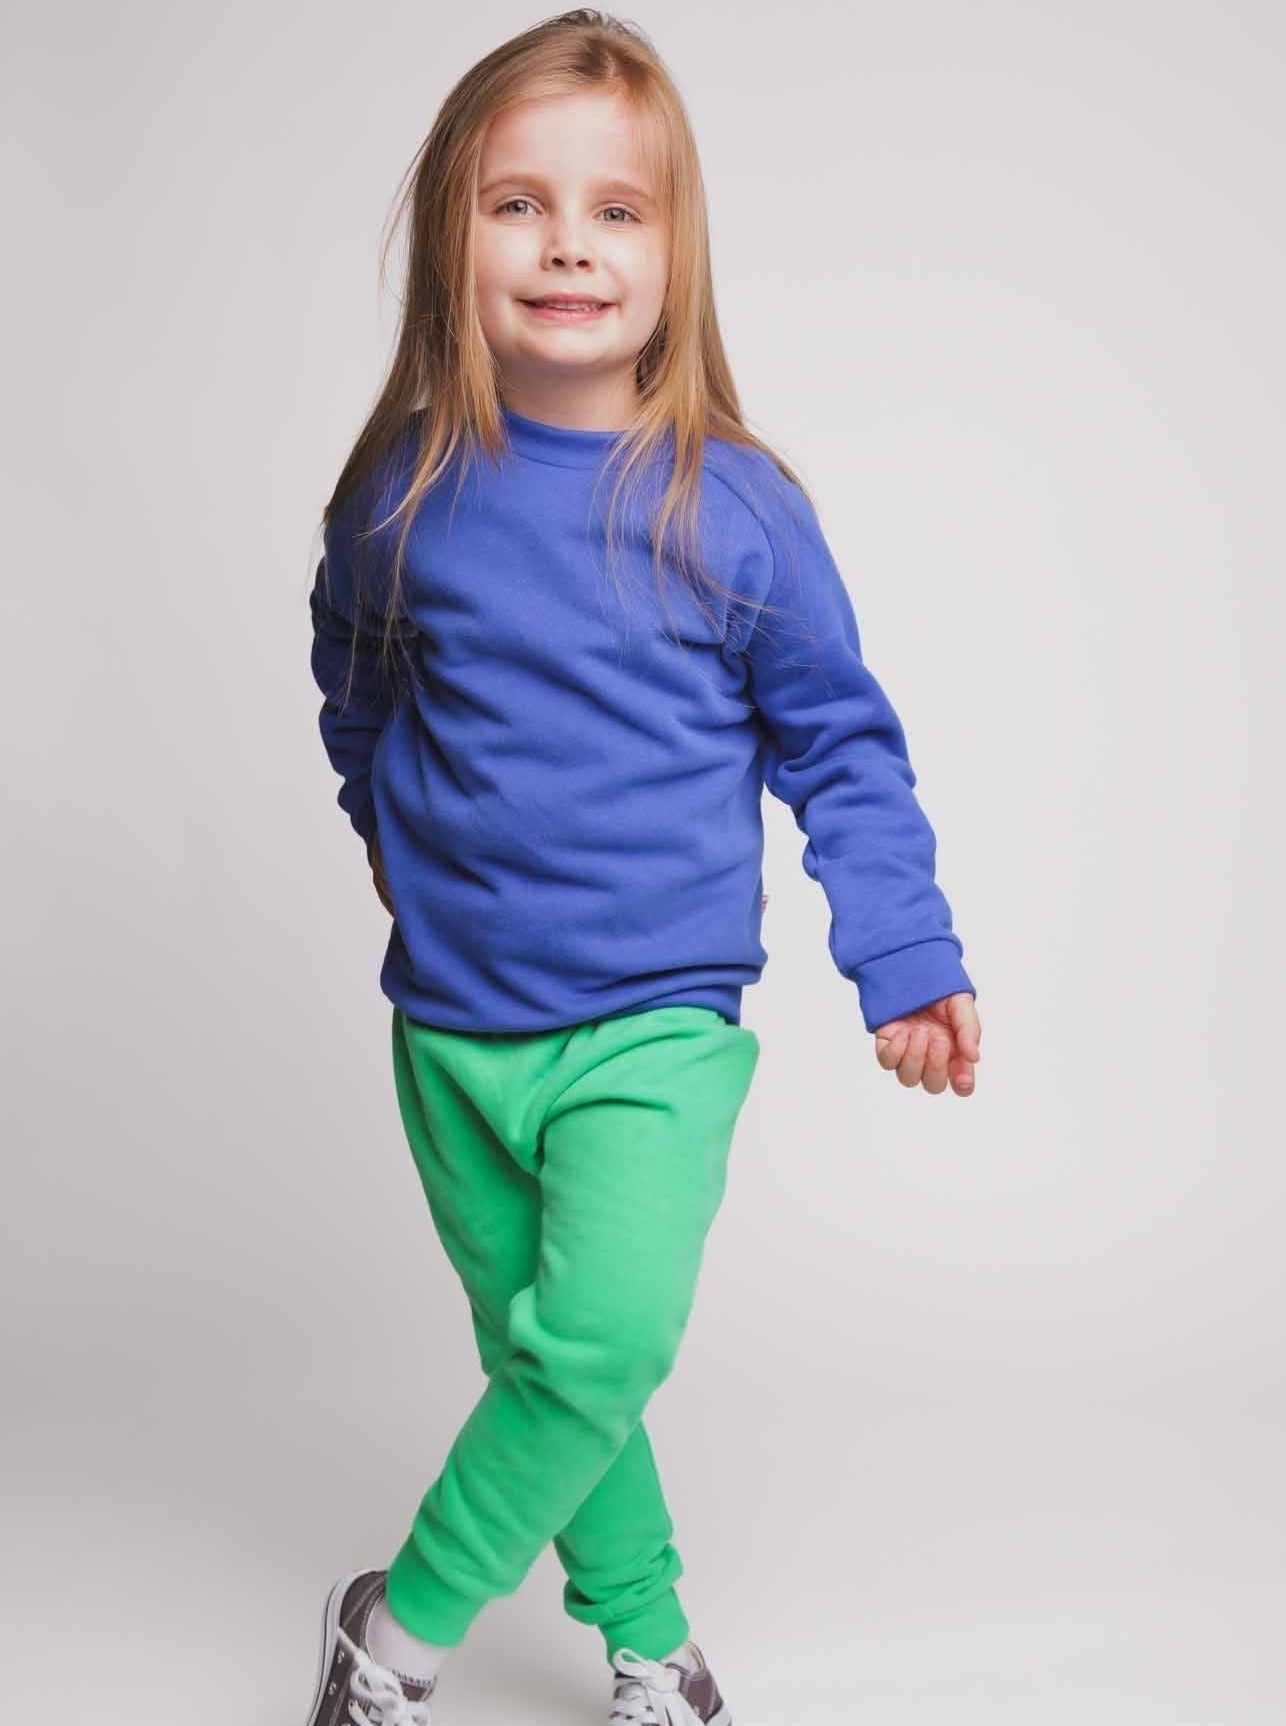 A girl wearing a blue jumper and green joggers - Hues Clothing